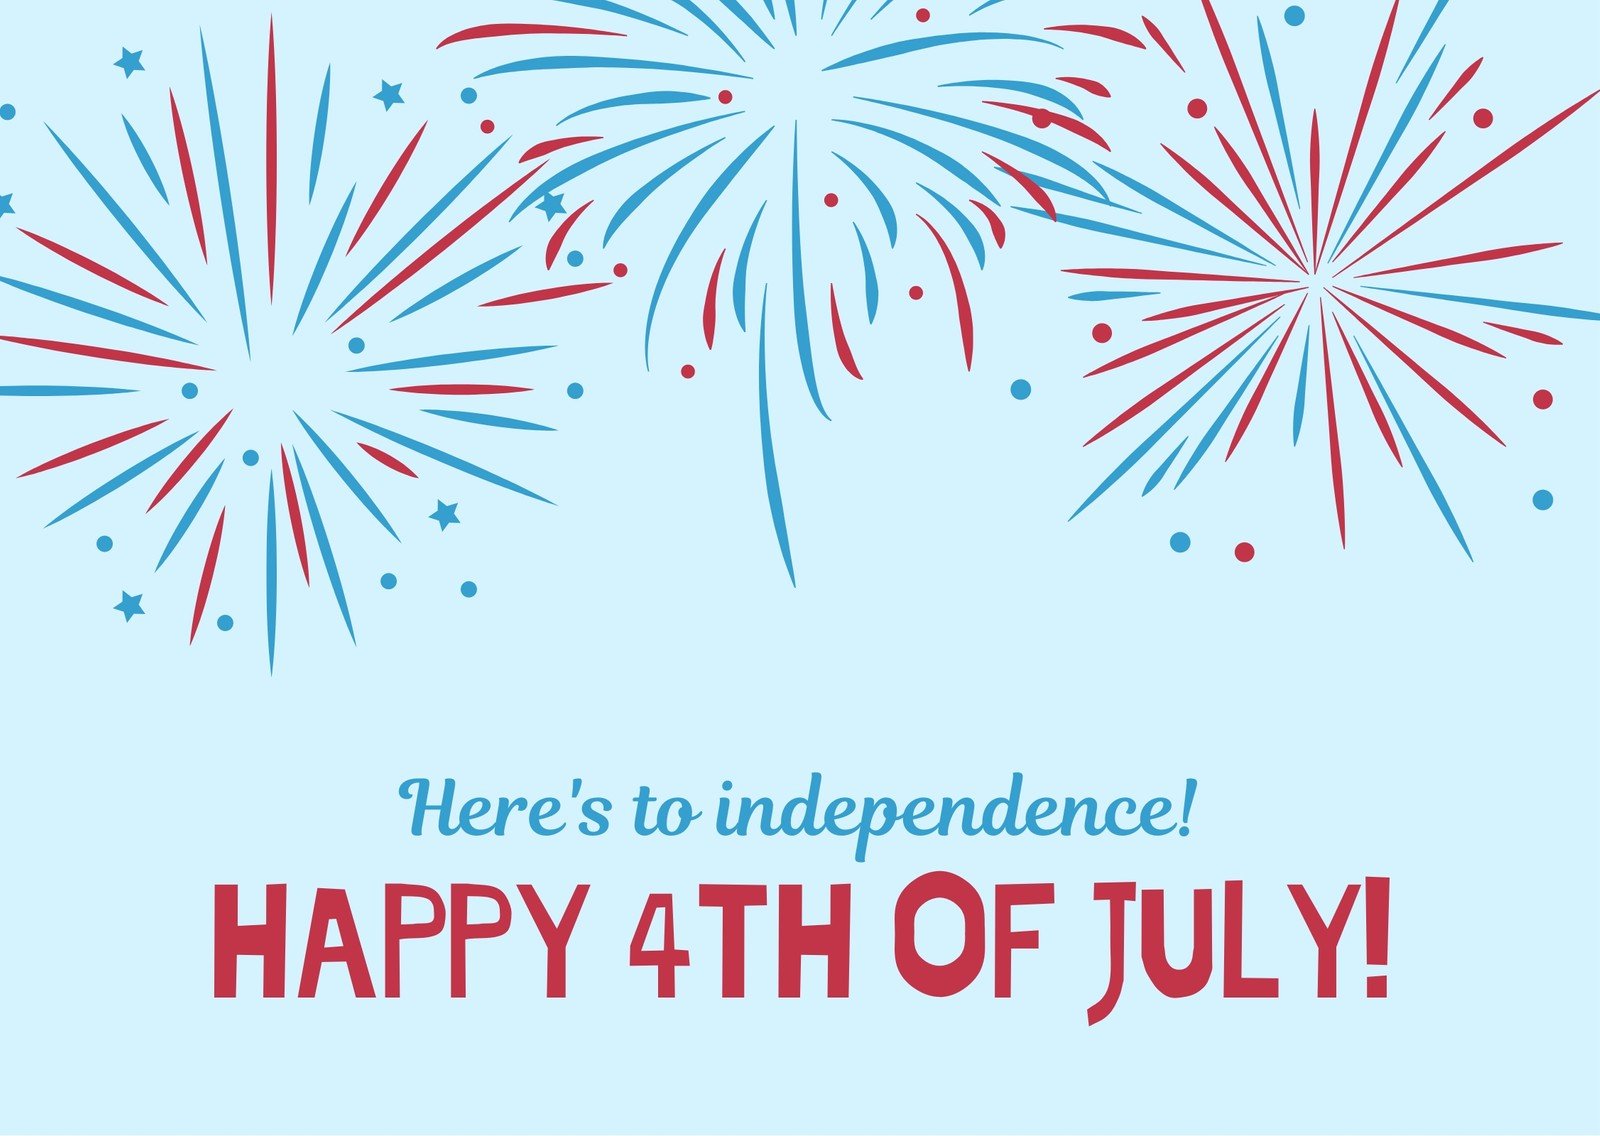 free-printable-customizable-4th-of-july-card-templates-canva